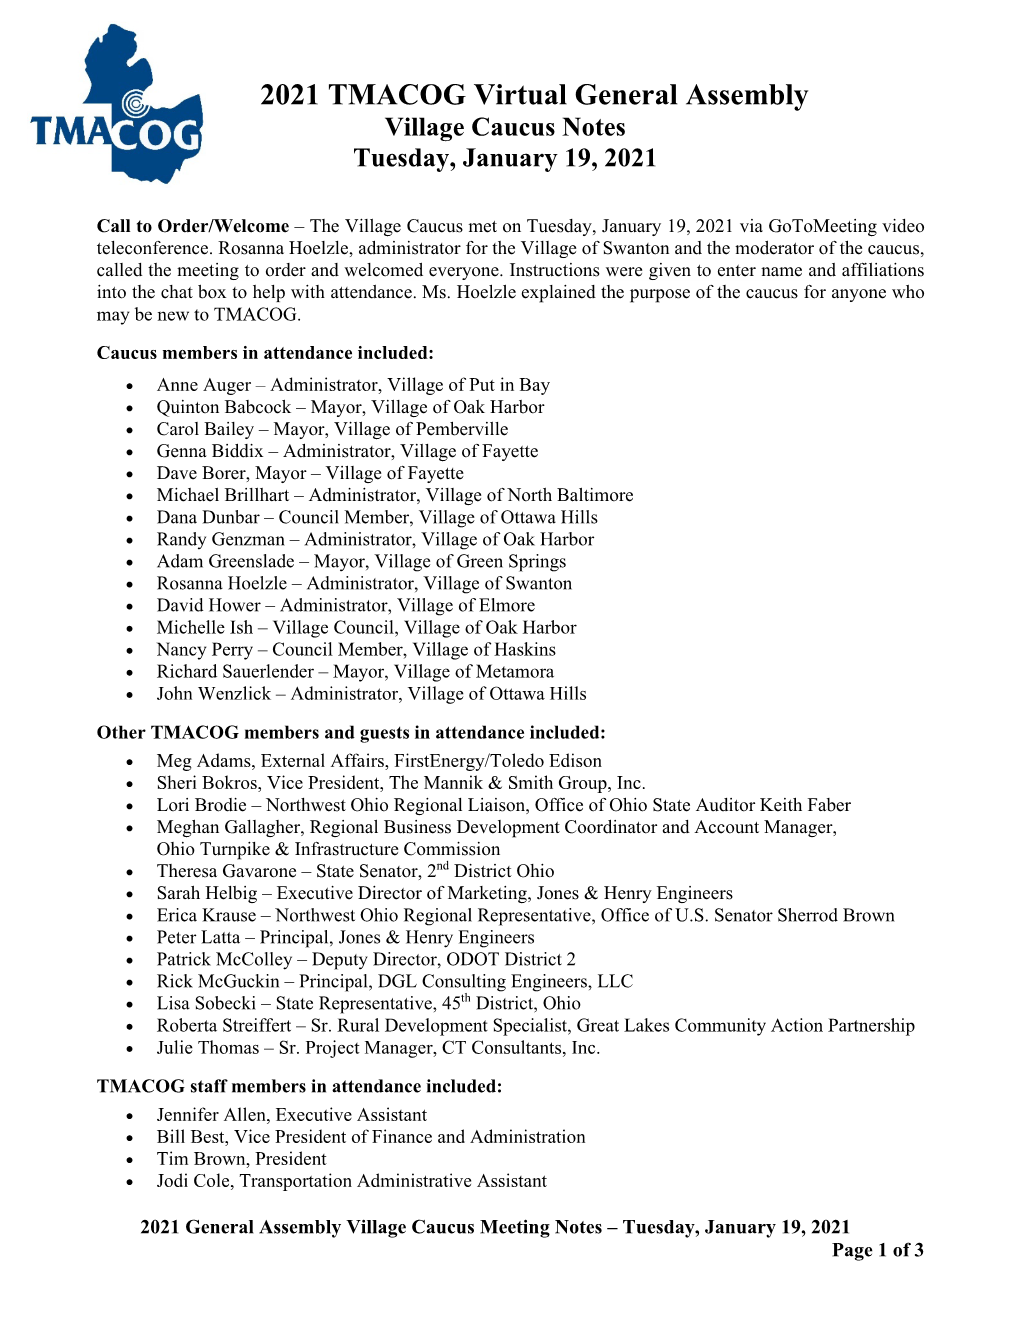 Village Caucus Notes Tuesday, January 19, 2021